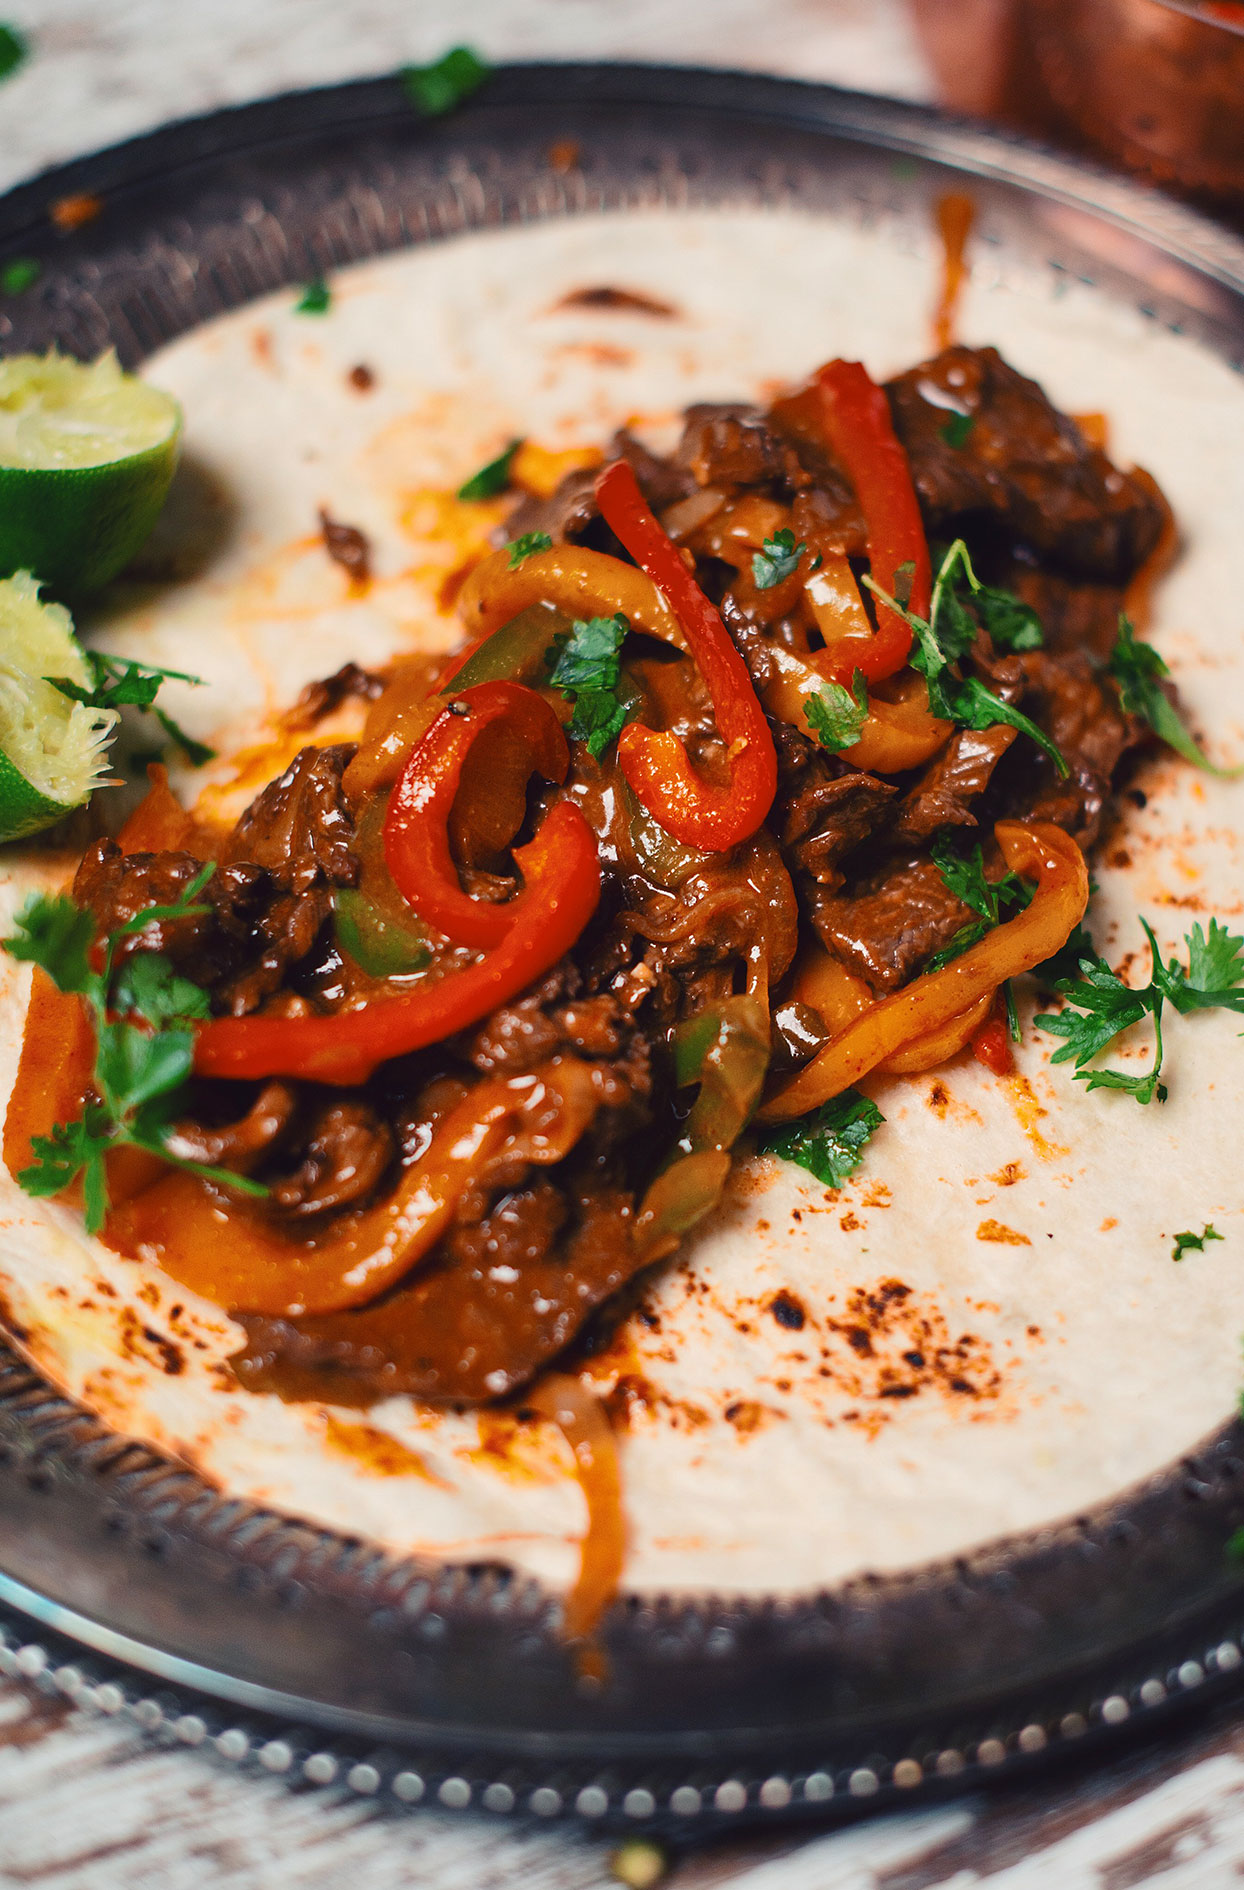 Beef fajitas with lime and beer marinade